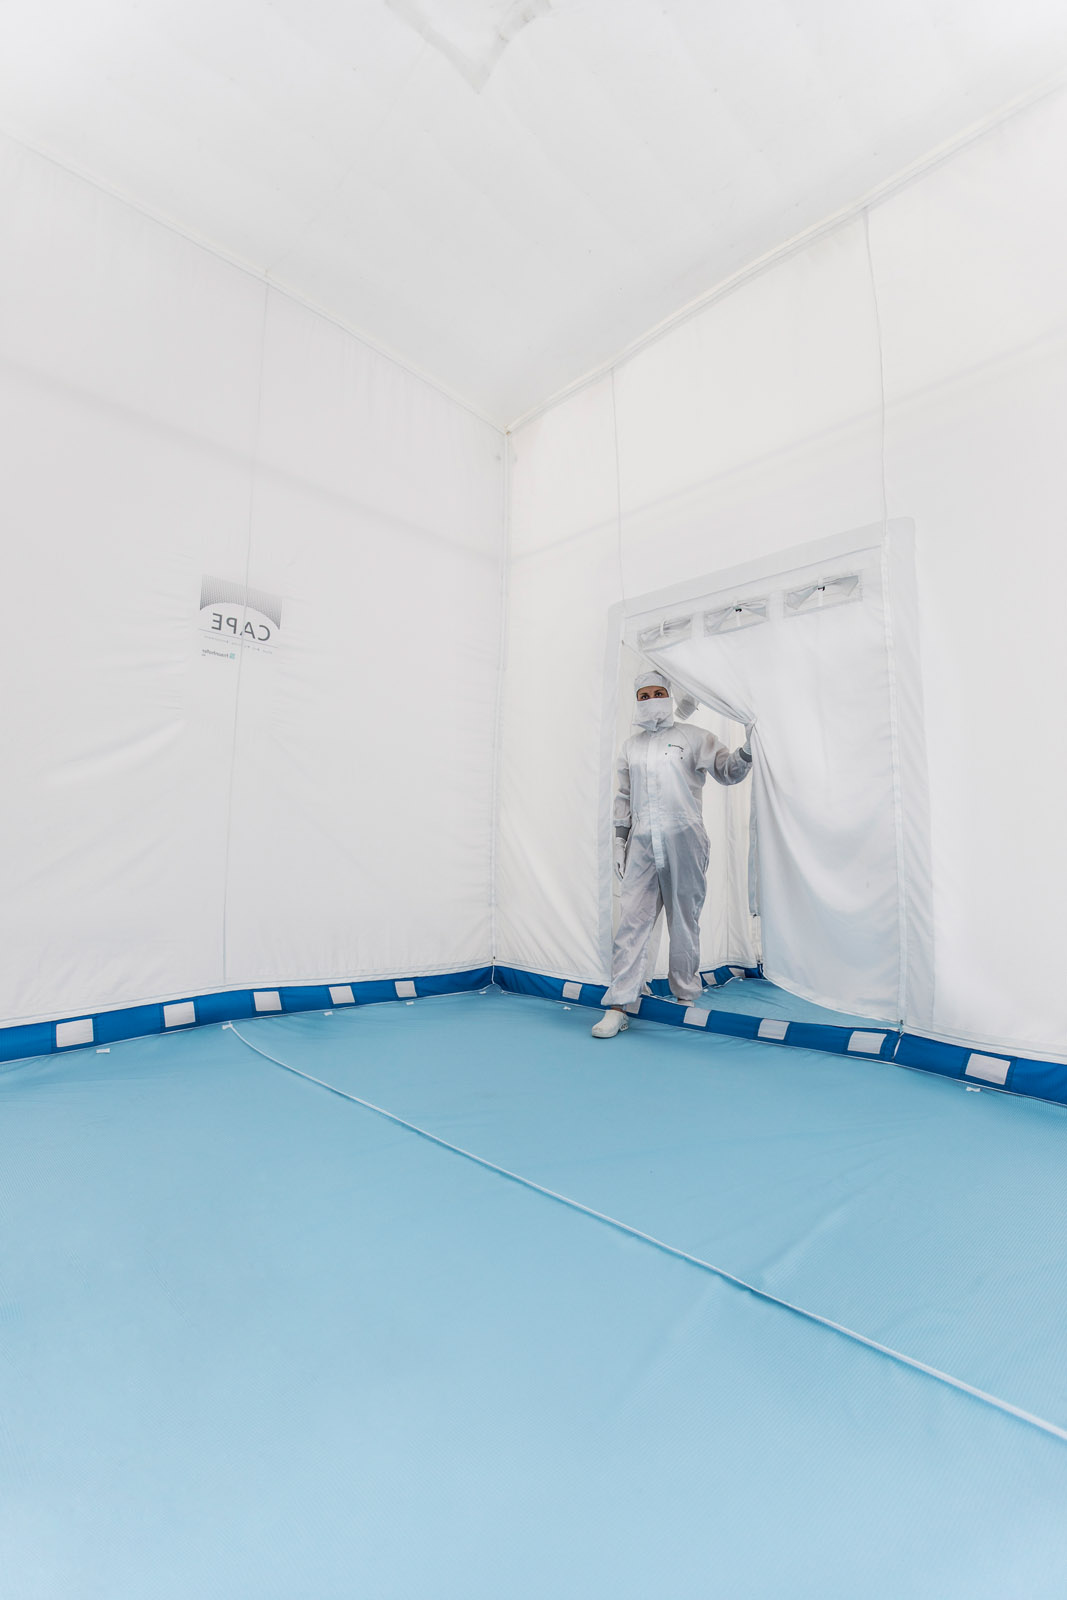 Cleanroom viewed from the inside.